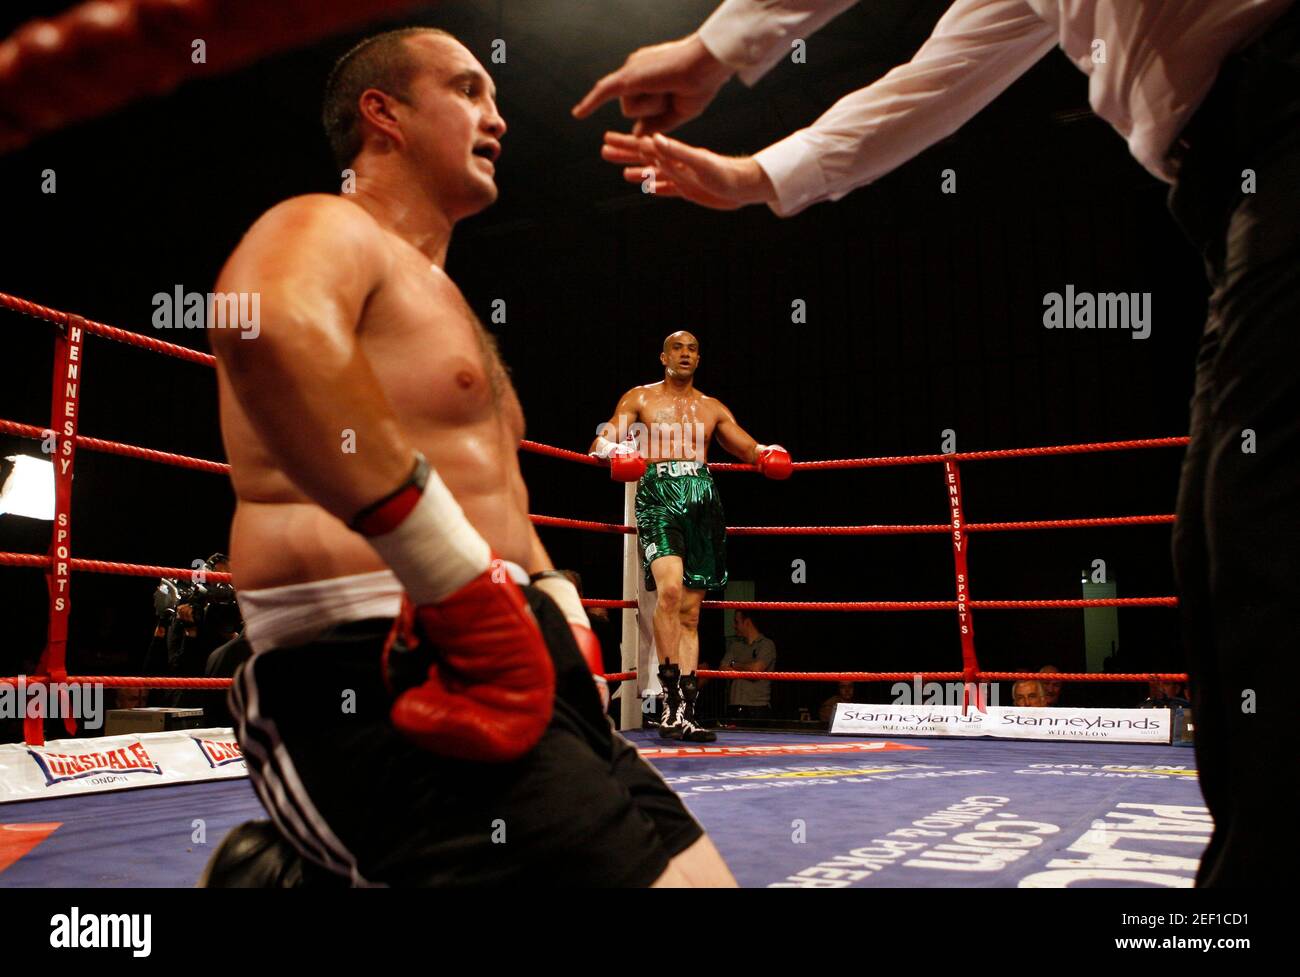 Page 3 - Boxing Referee Count High Resolution Stock Photography and Images  - Alamy